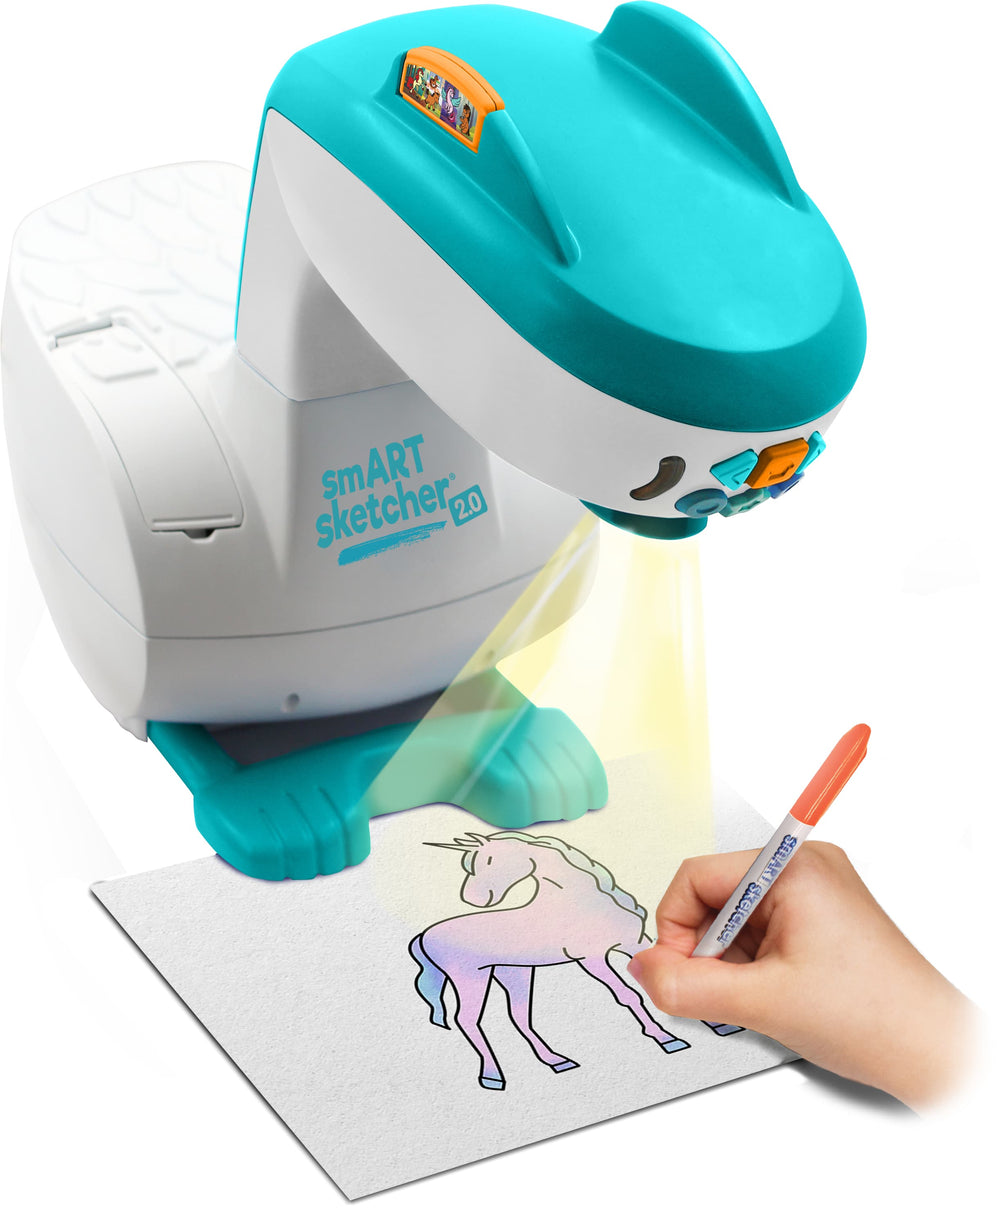 smART Sketcher Projector with Museum Art Collection 